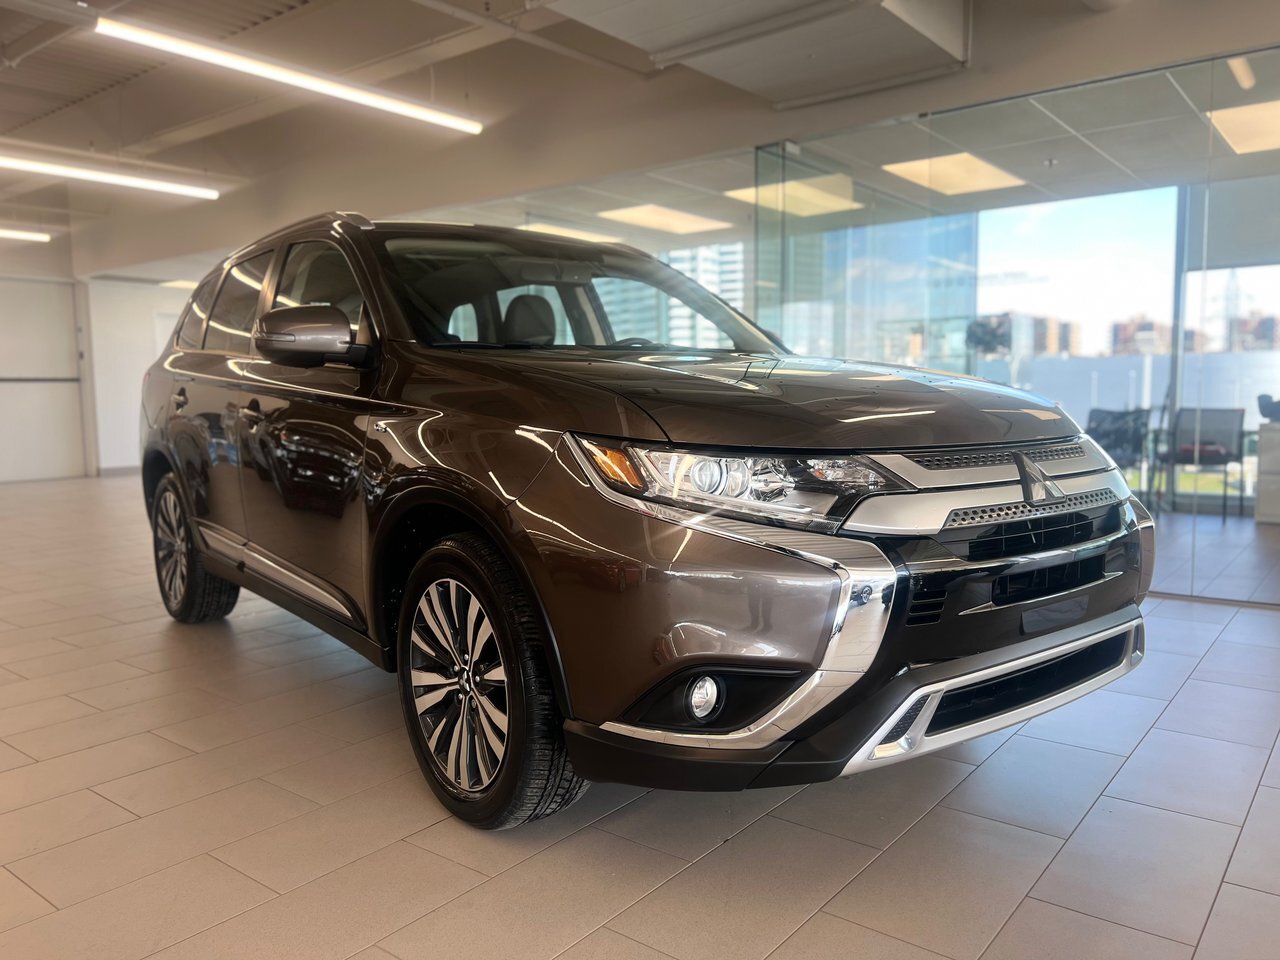 2020 Mitsubishi Outlander Se leather-mags-7 pass / toit-mag-7pass-cuir et su